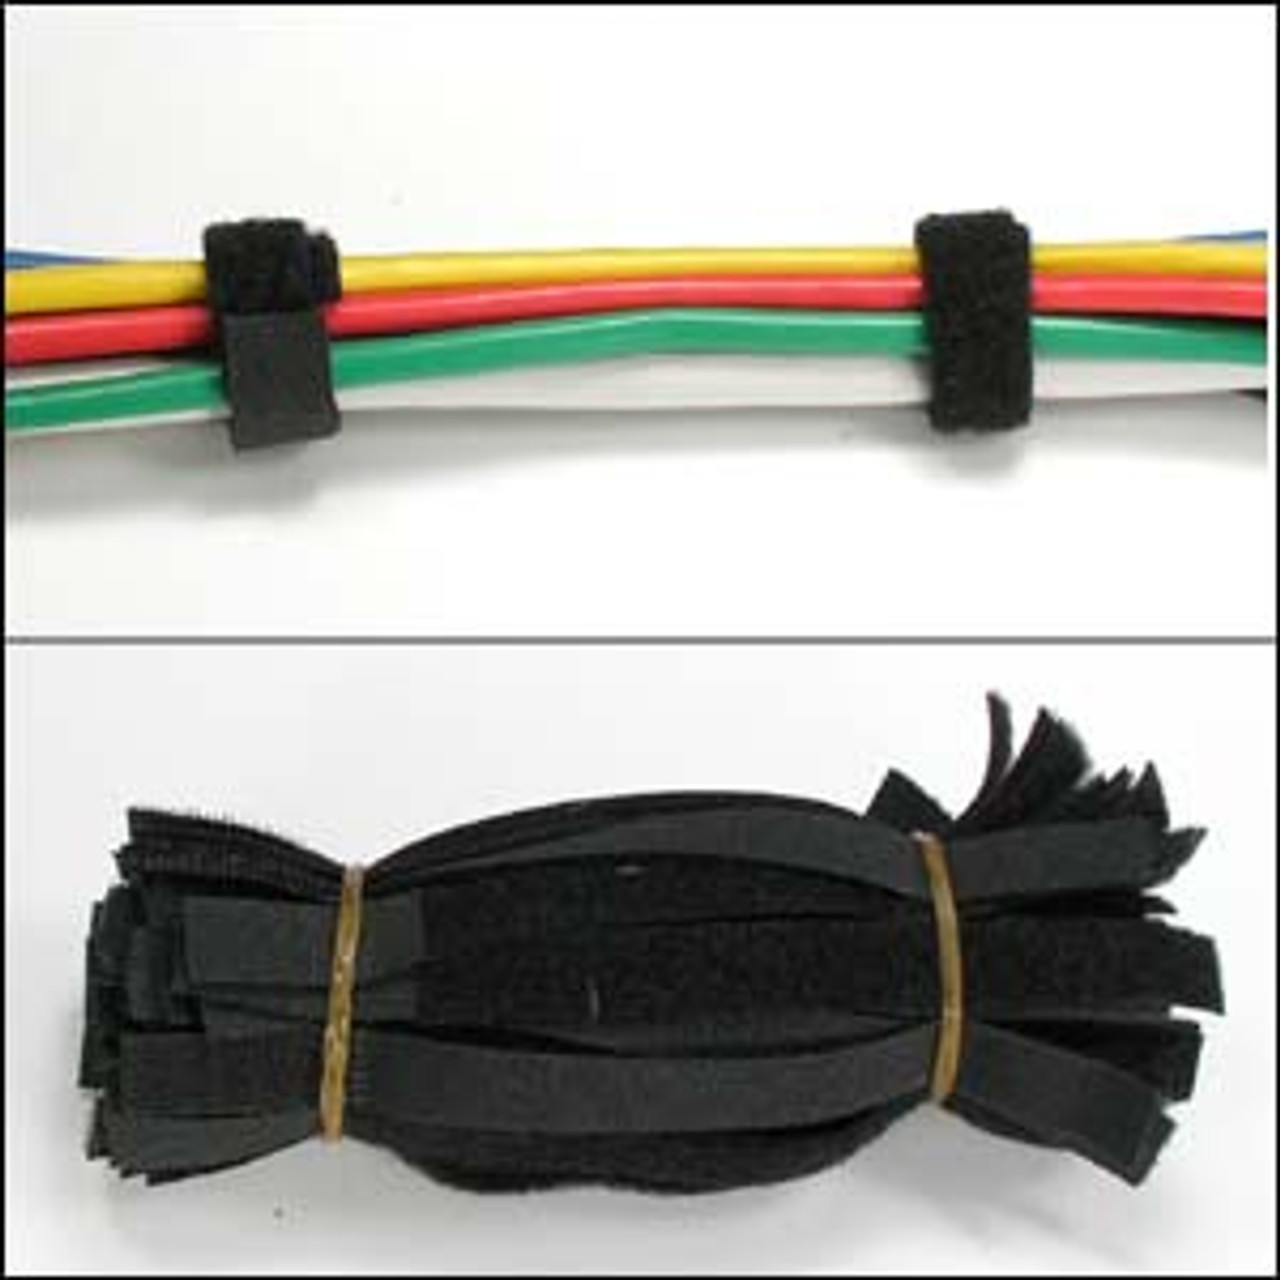 Velcro vs Zip Ties for Network Cable Tested